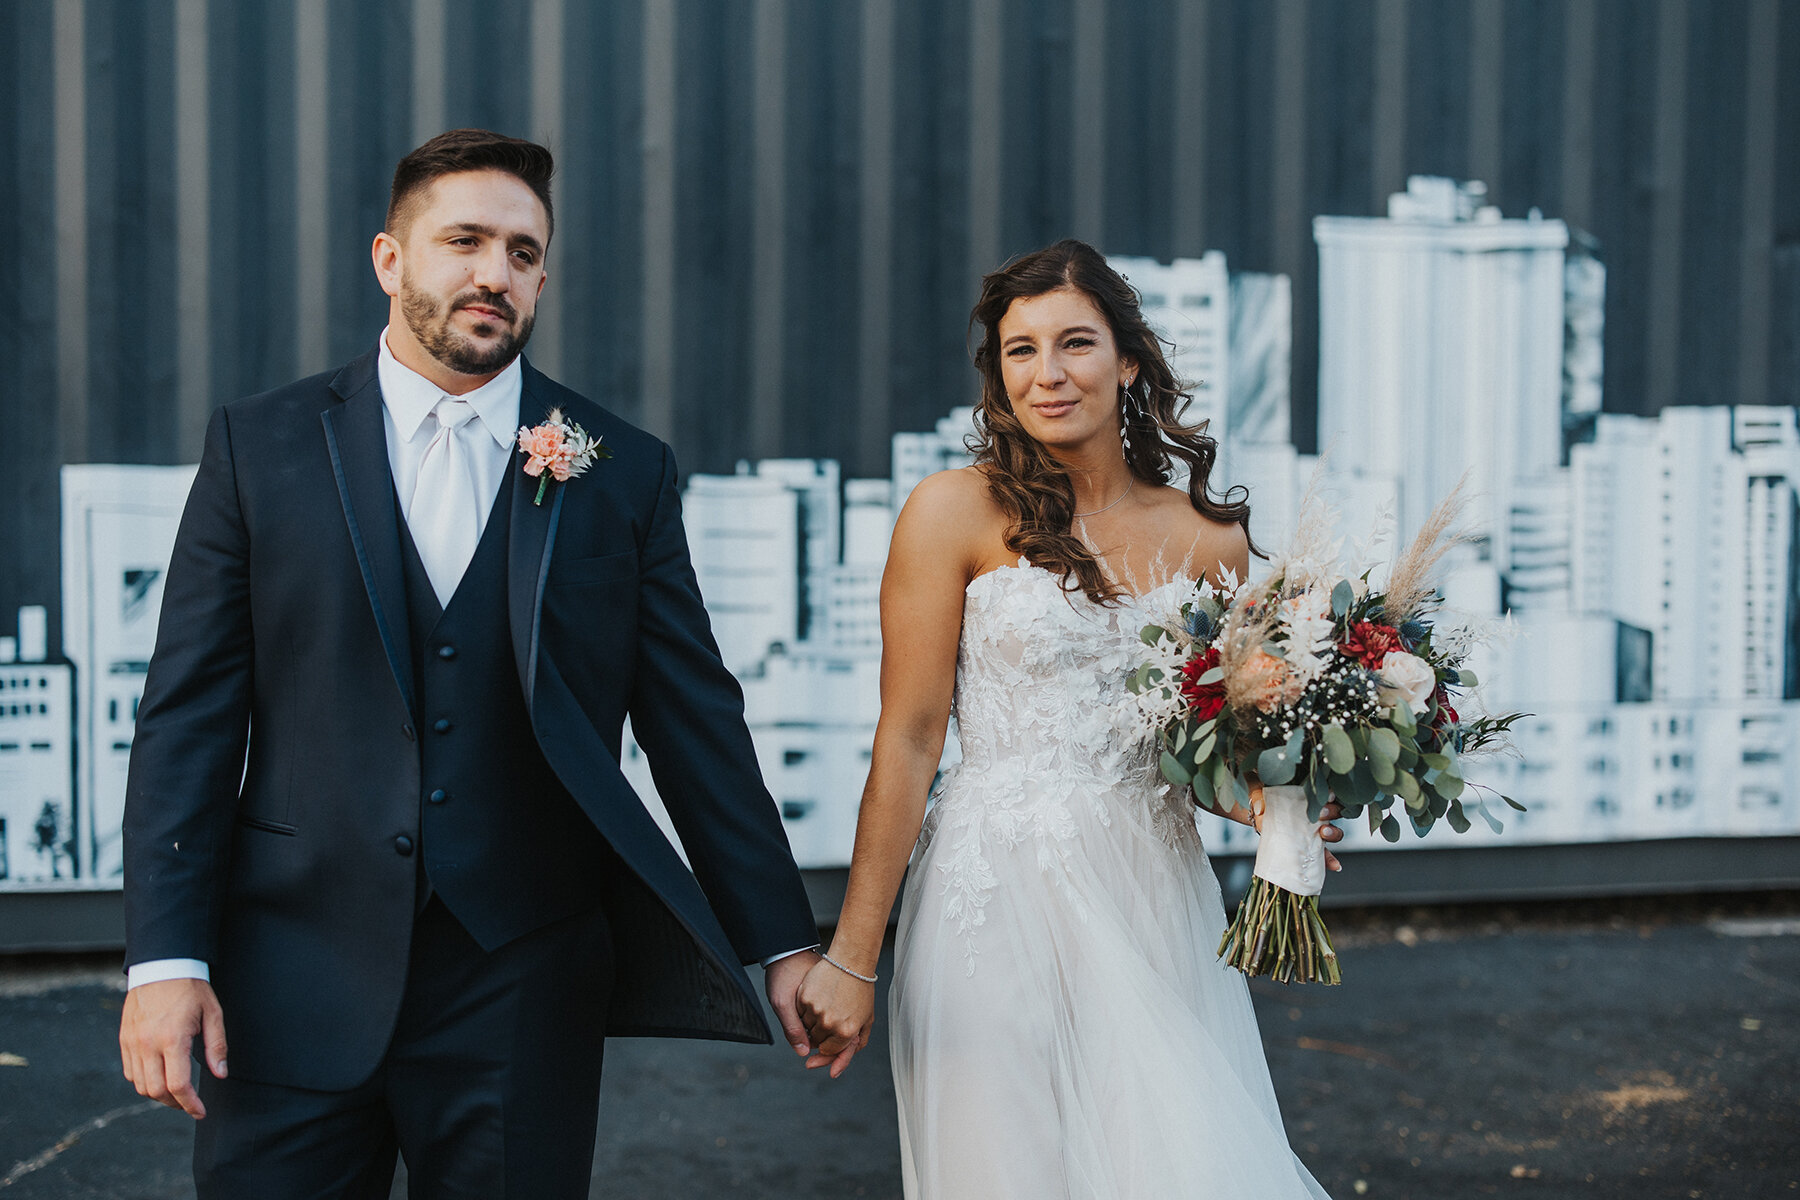 Scenes from around The Brightside. 🖤

We love seeing how our couples make the most out of every inch of the venue. 

#SHINEONDAYTON 

Images: @agdayton 

#thebrightsidedayton #daytonvenue #daytonvenues #daytonwedding #daytonweddings #daytonweddingve